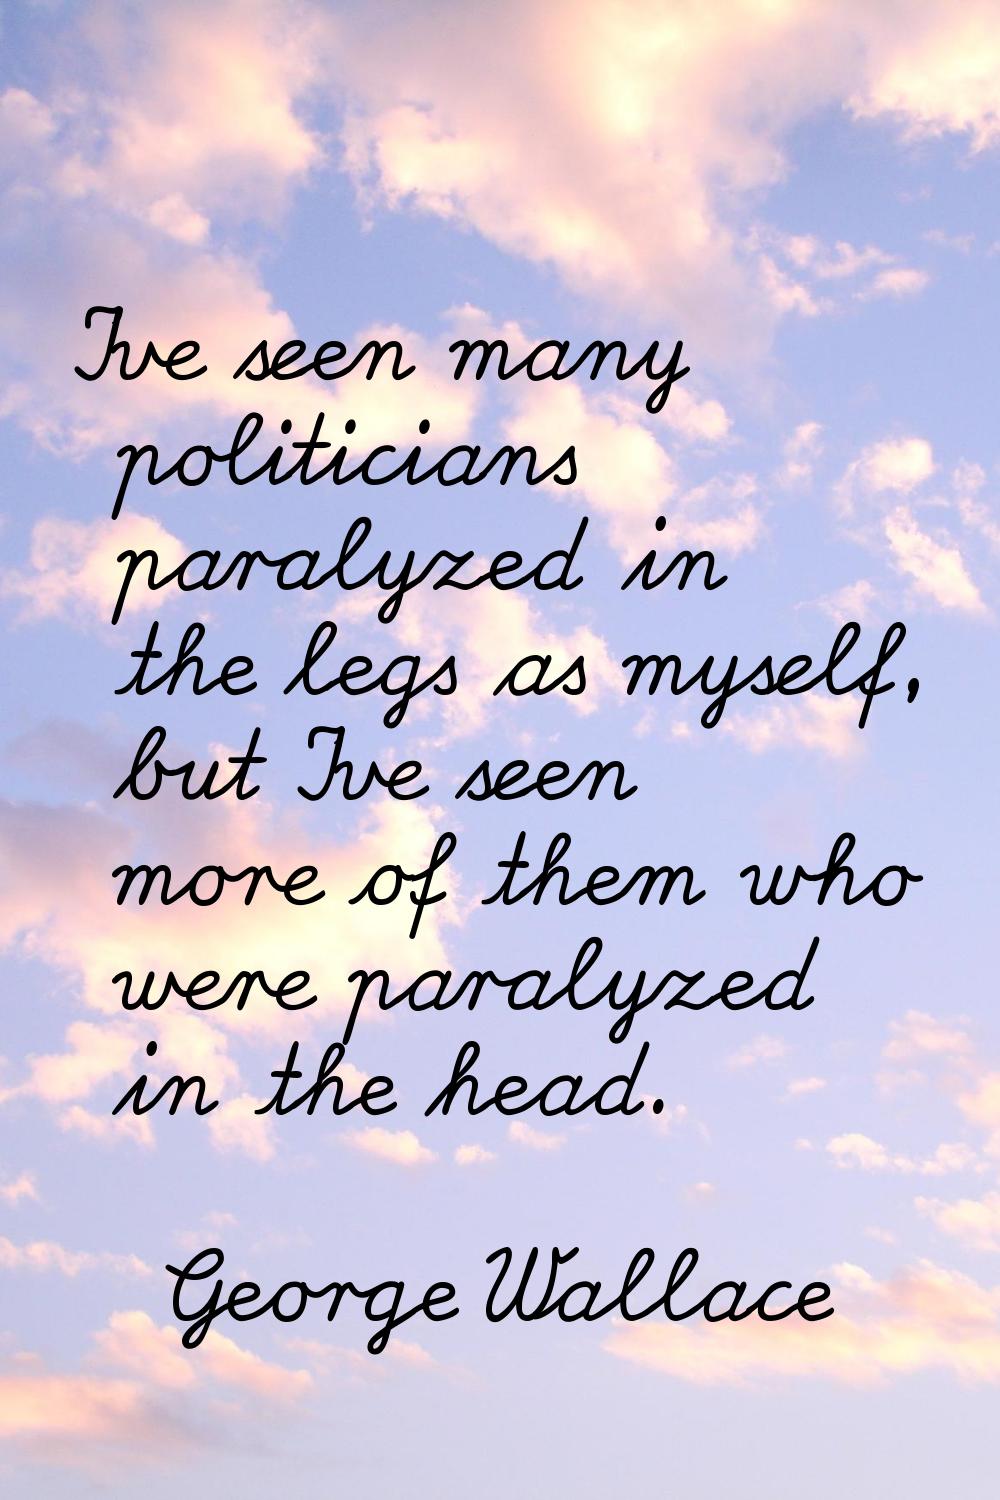 I've seen many politicians paralyzed in the legs as myself, but I've seen more of them who were par